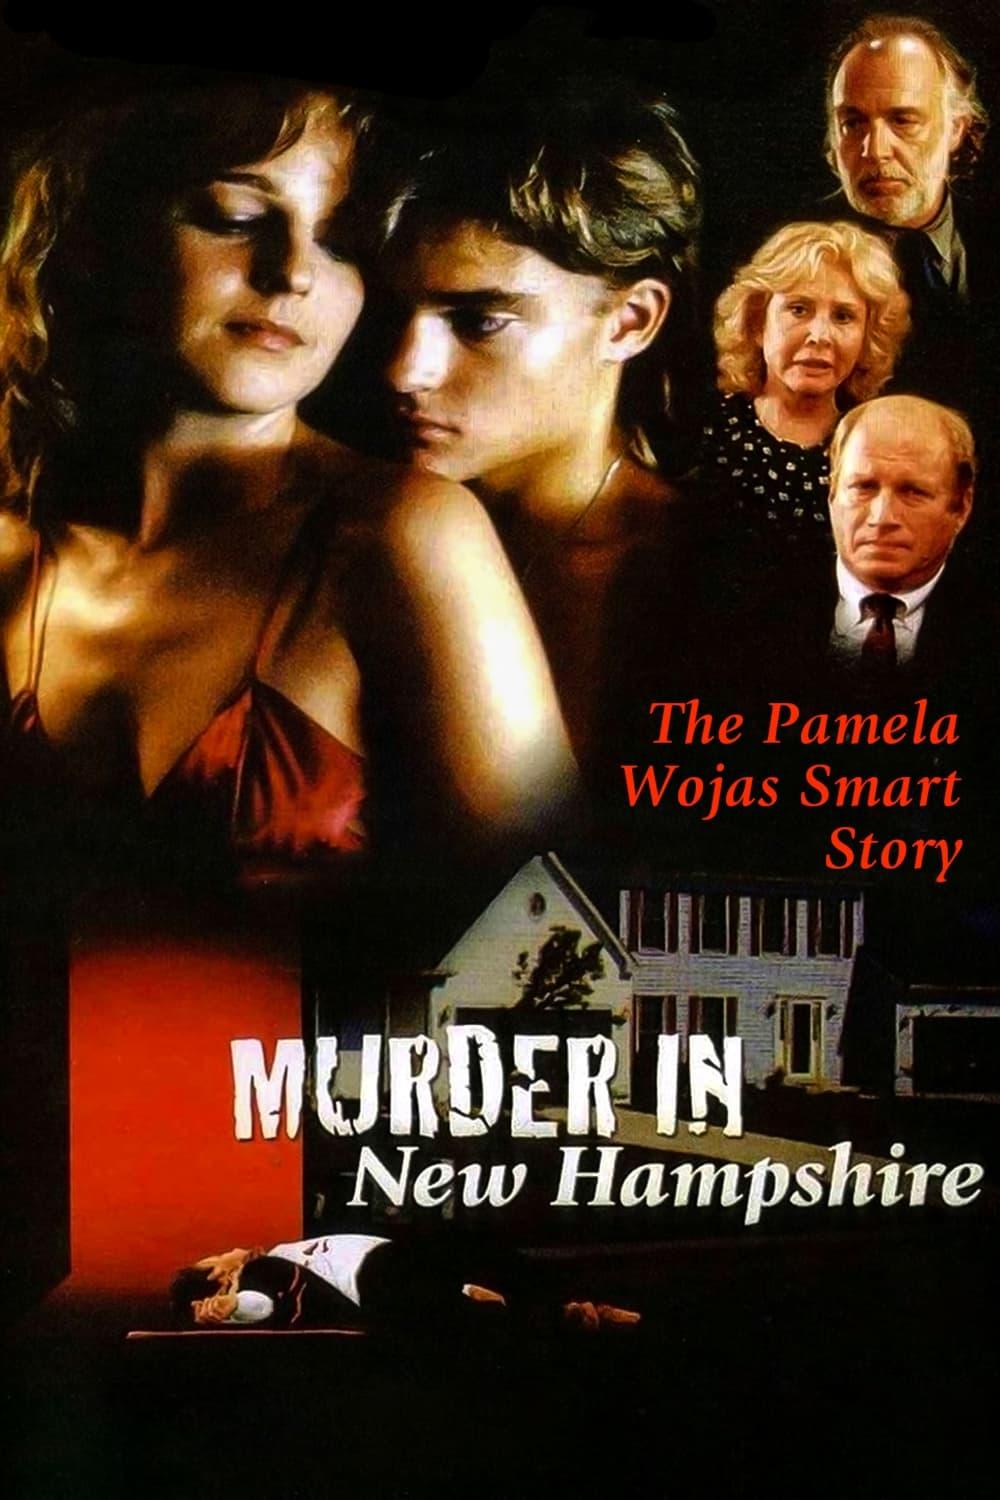 Murder in New Hampshire: The Pamela Wojas Smart Story poster